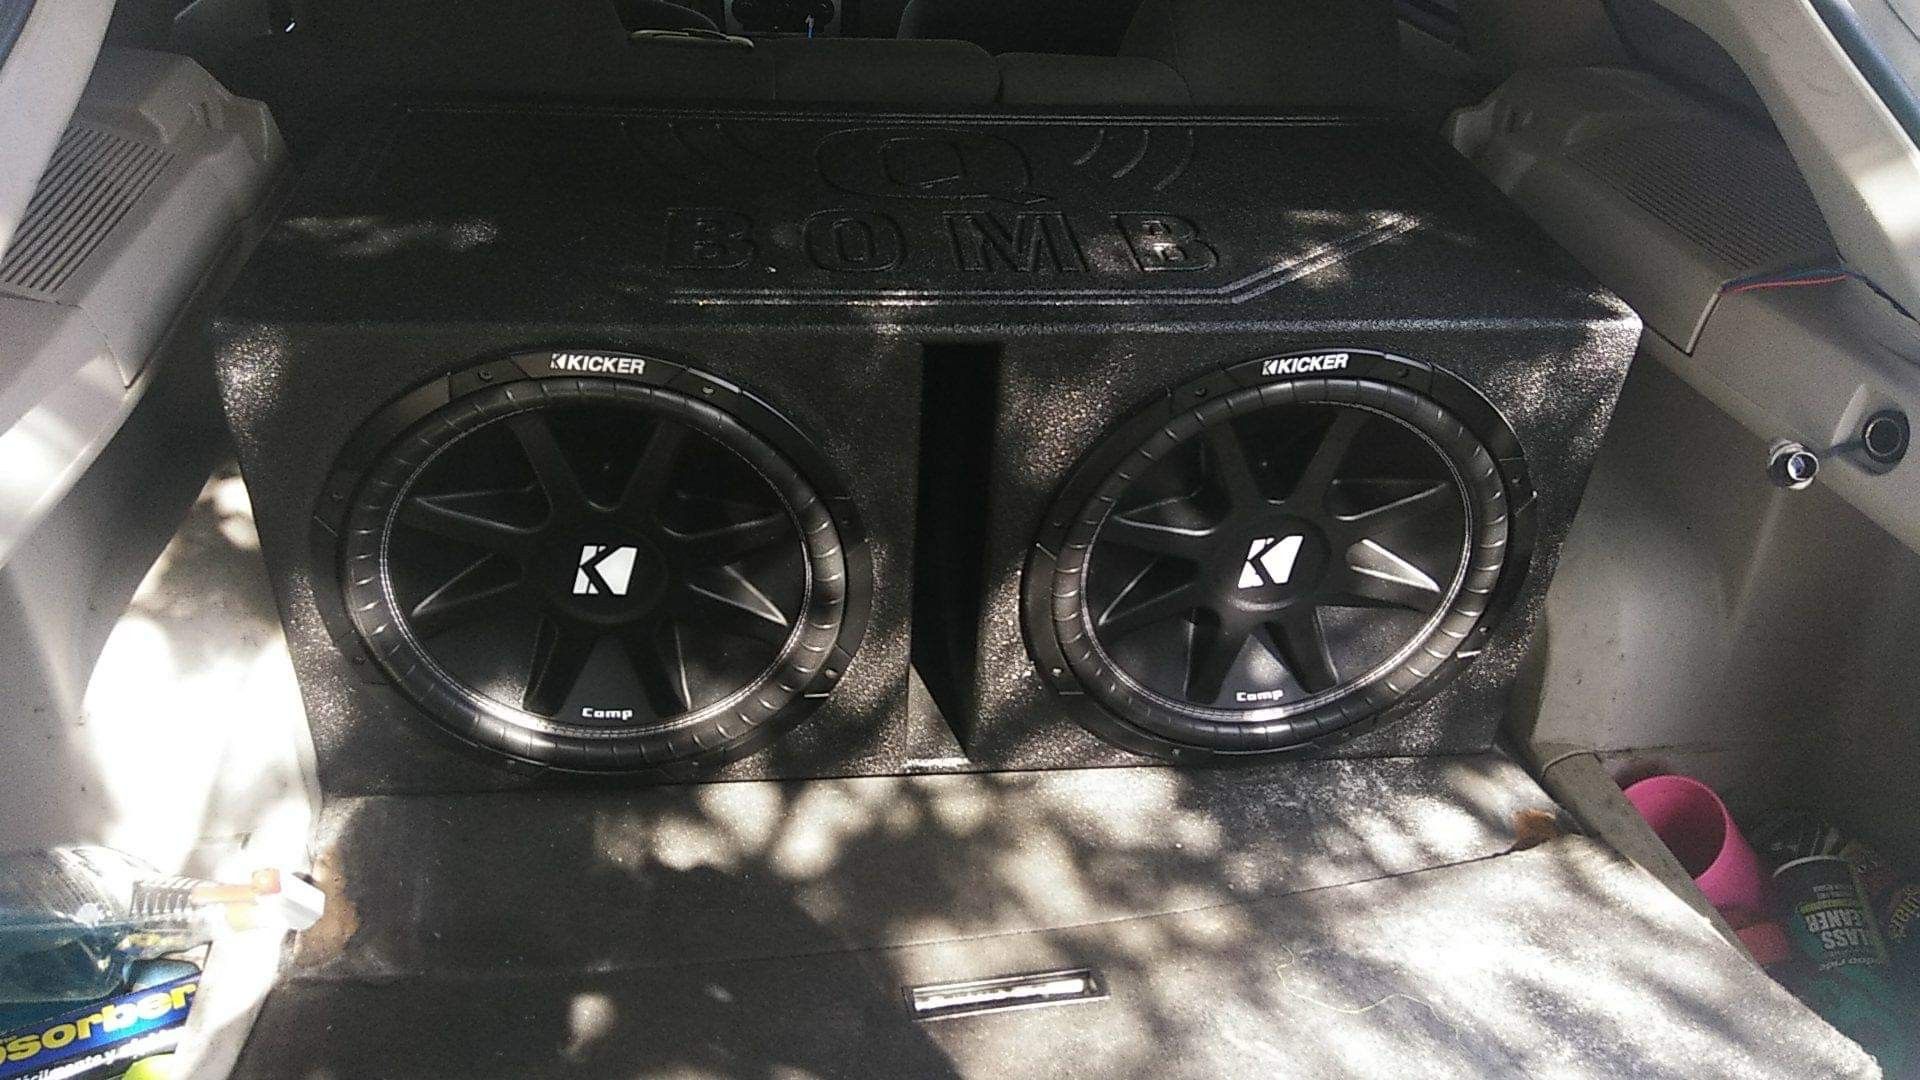 2 15 subs kicker with 5000 planet audio amp in pro box